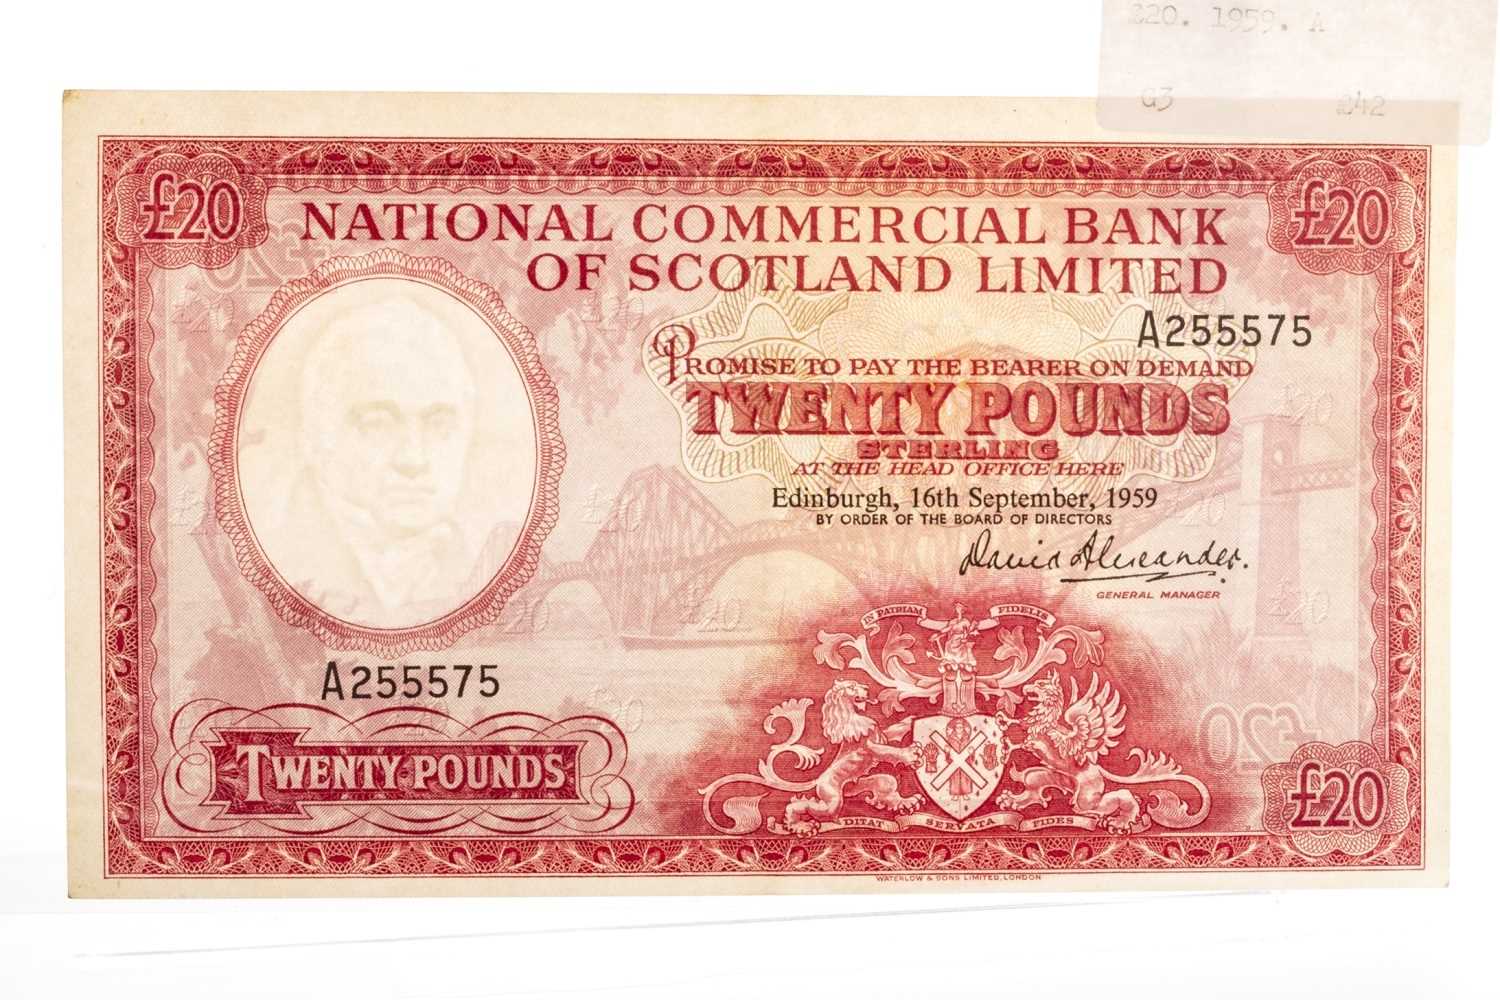 Lot 620 - NATIONAL COMMERCIAL BANK OF SCOTLAND LIMITED £20 NOTE DATED 1959